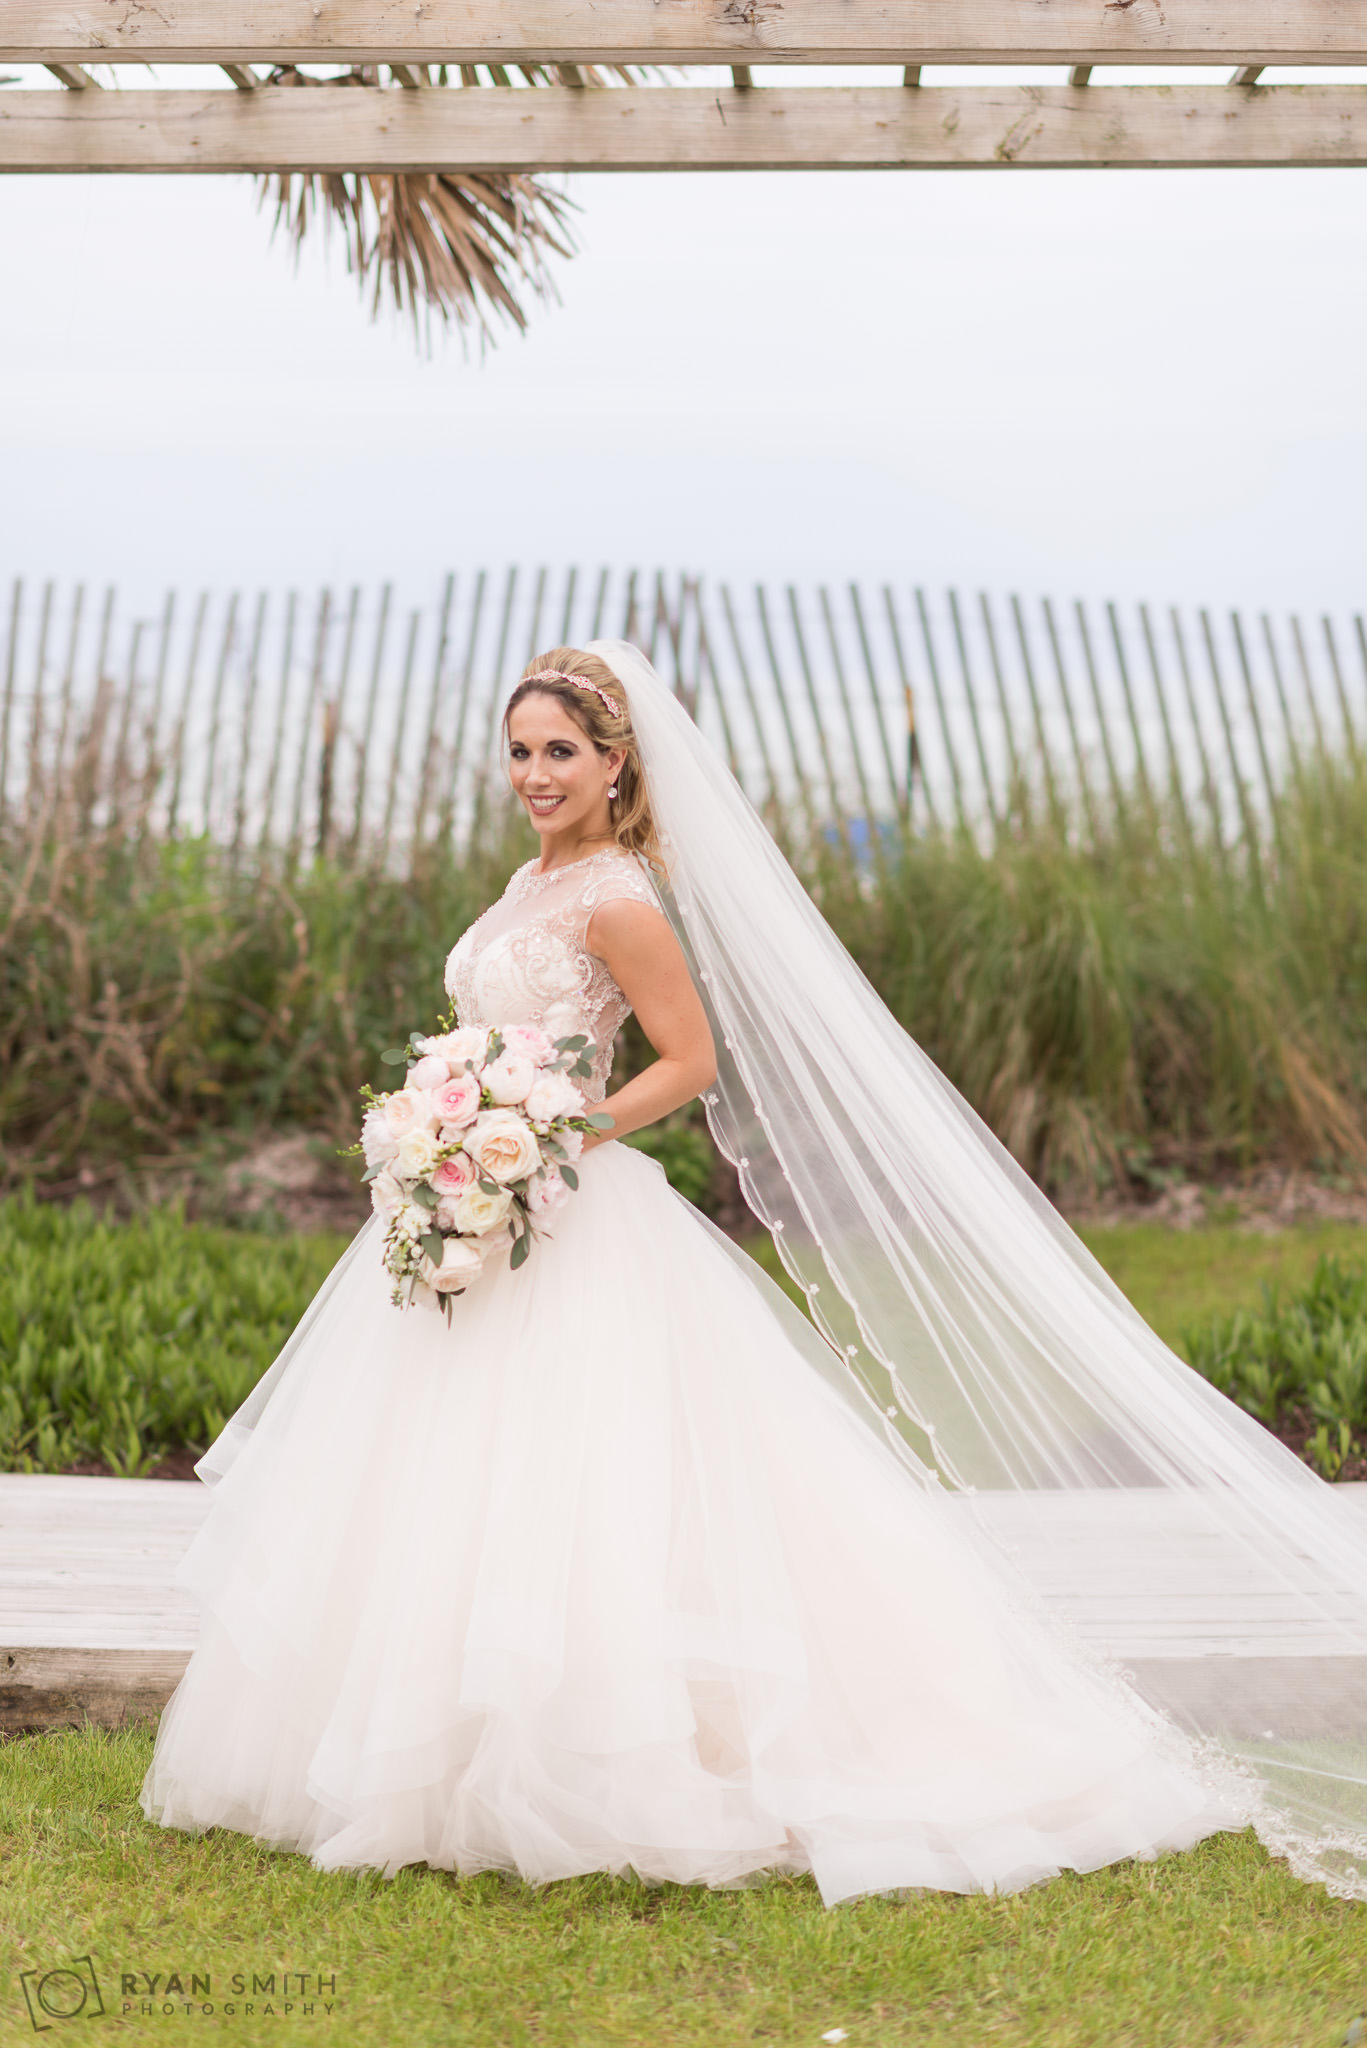 Bride posing with her dress and flowers Hilton Myrtle Beach Resort